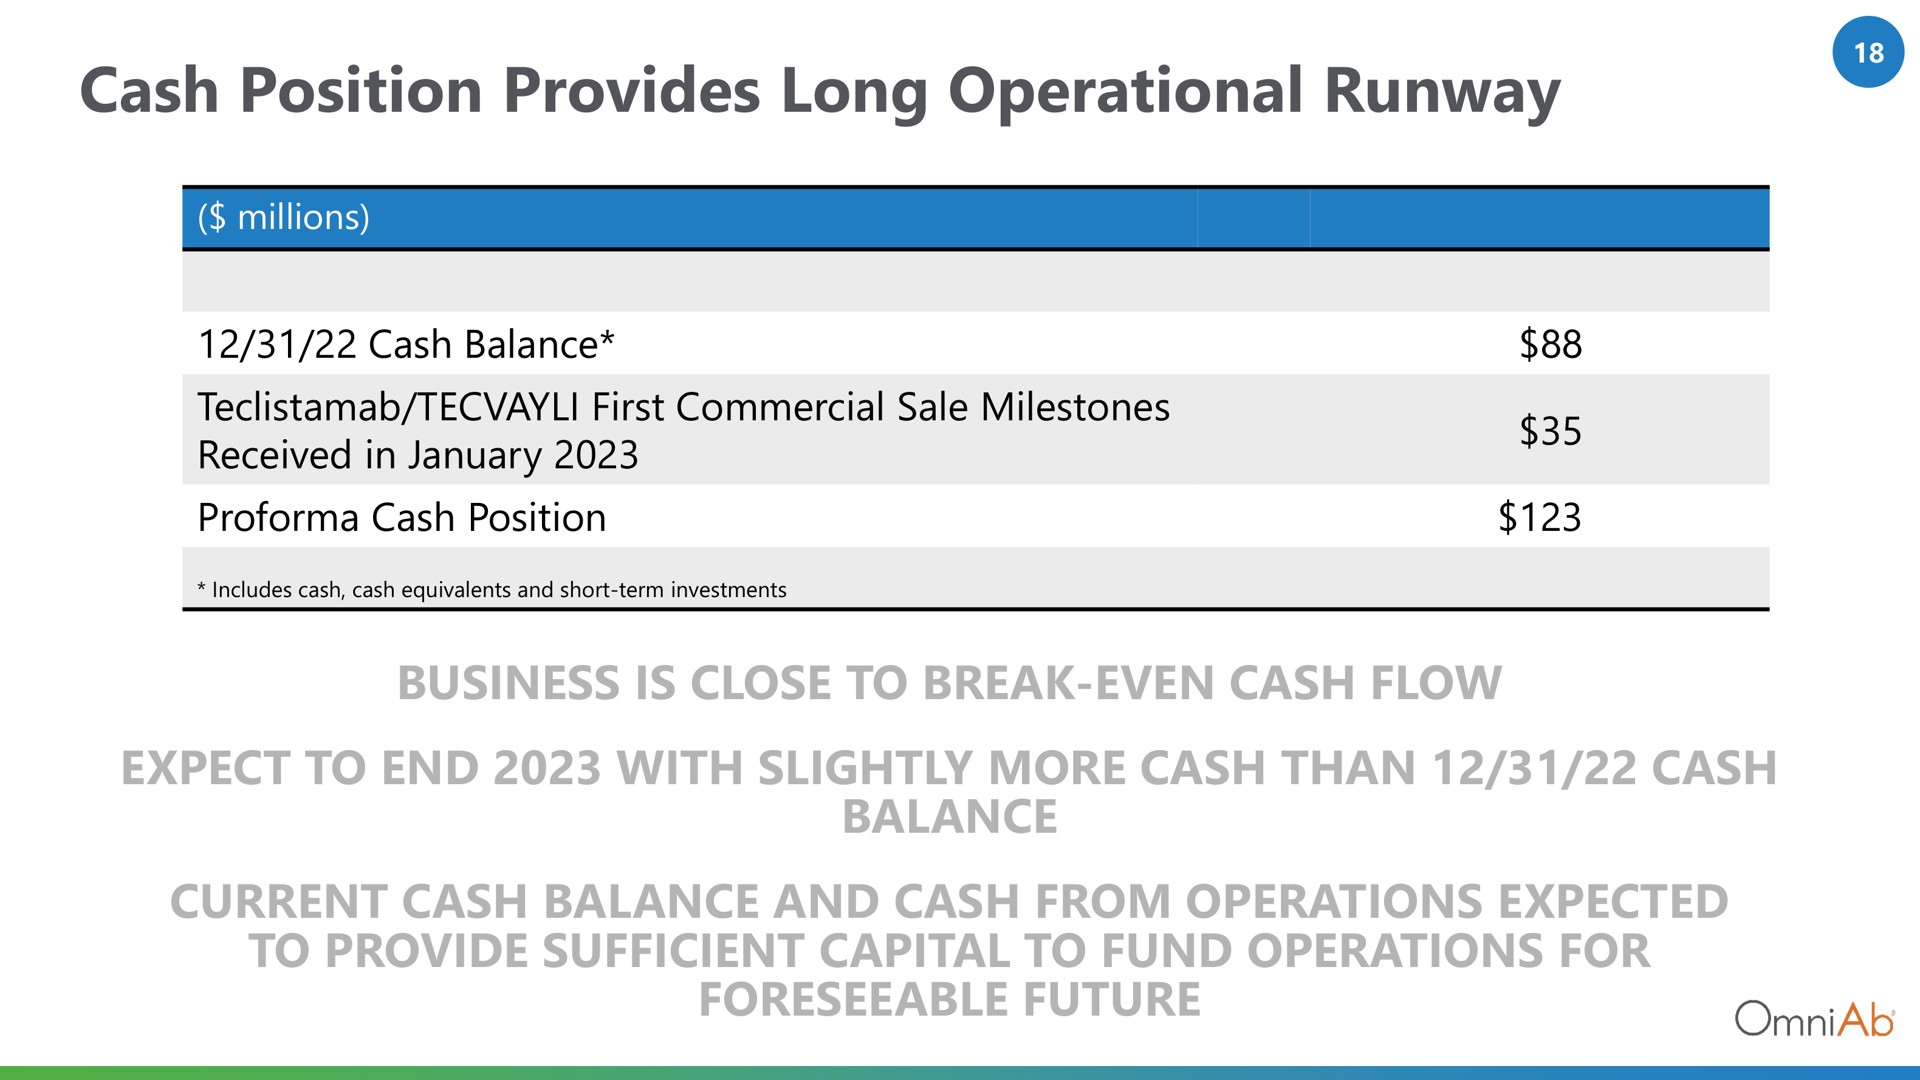 cash position provides long operational runway business is close to break even cash flow expect to end with slightly more cash than cash balance current cash balance and cash from operations expected to provide sufficient capital to fund operations for foreseeable future | OmniAb